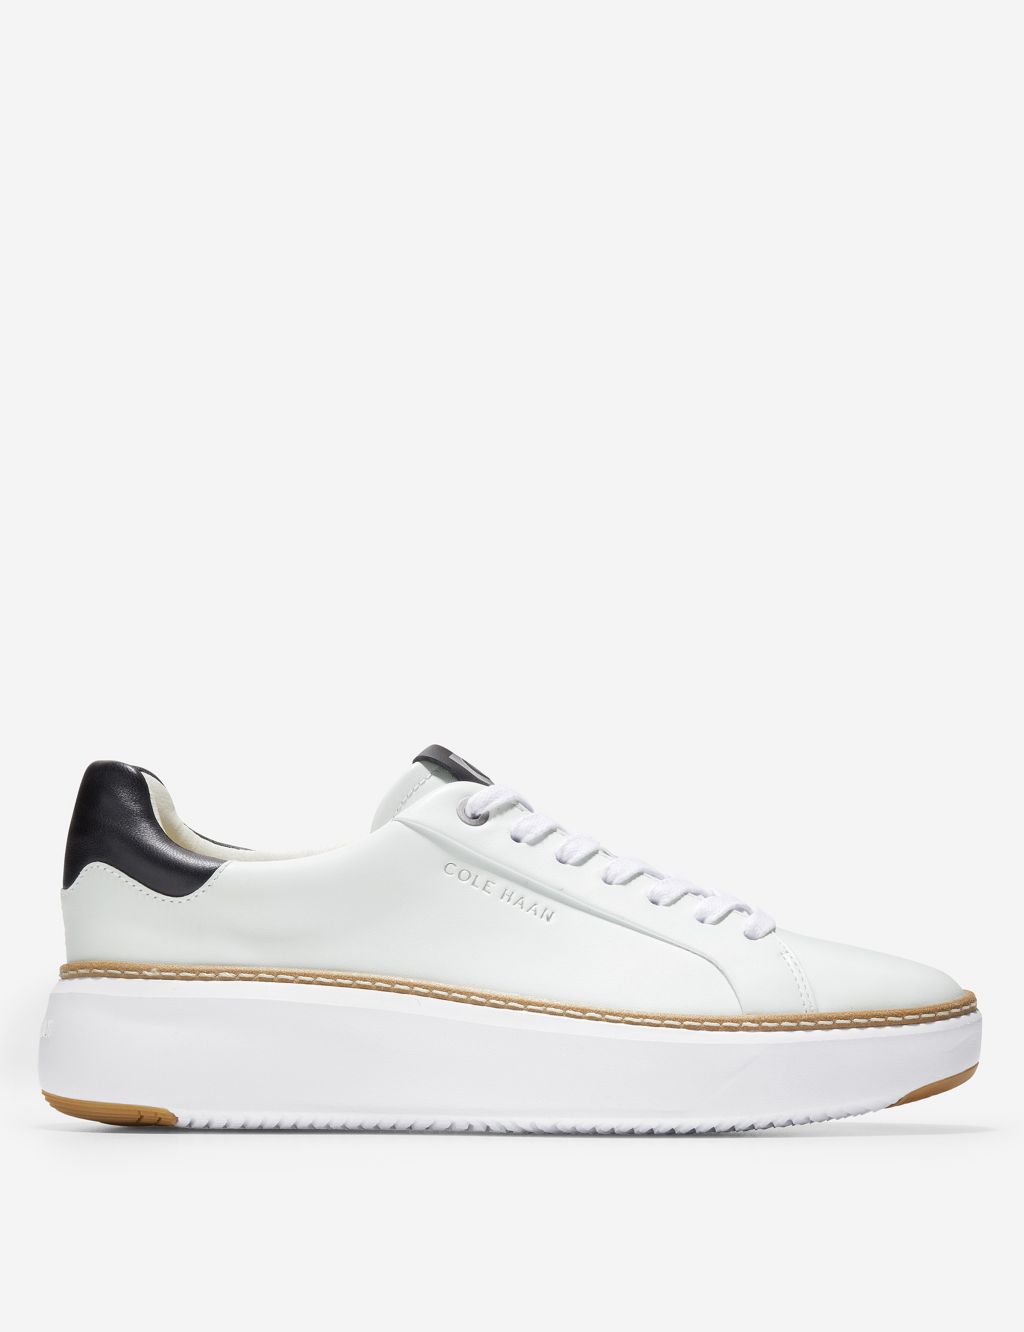 Grandpro Topspin Leather Lace Up Trainers image 1